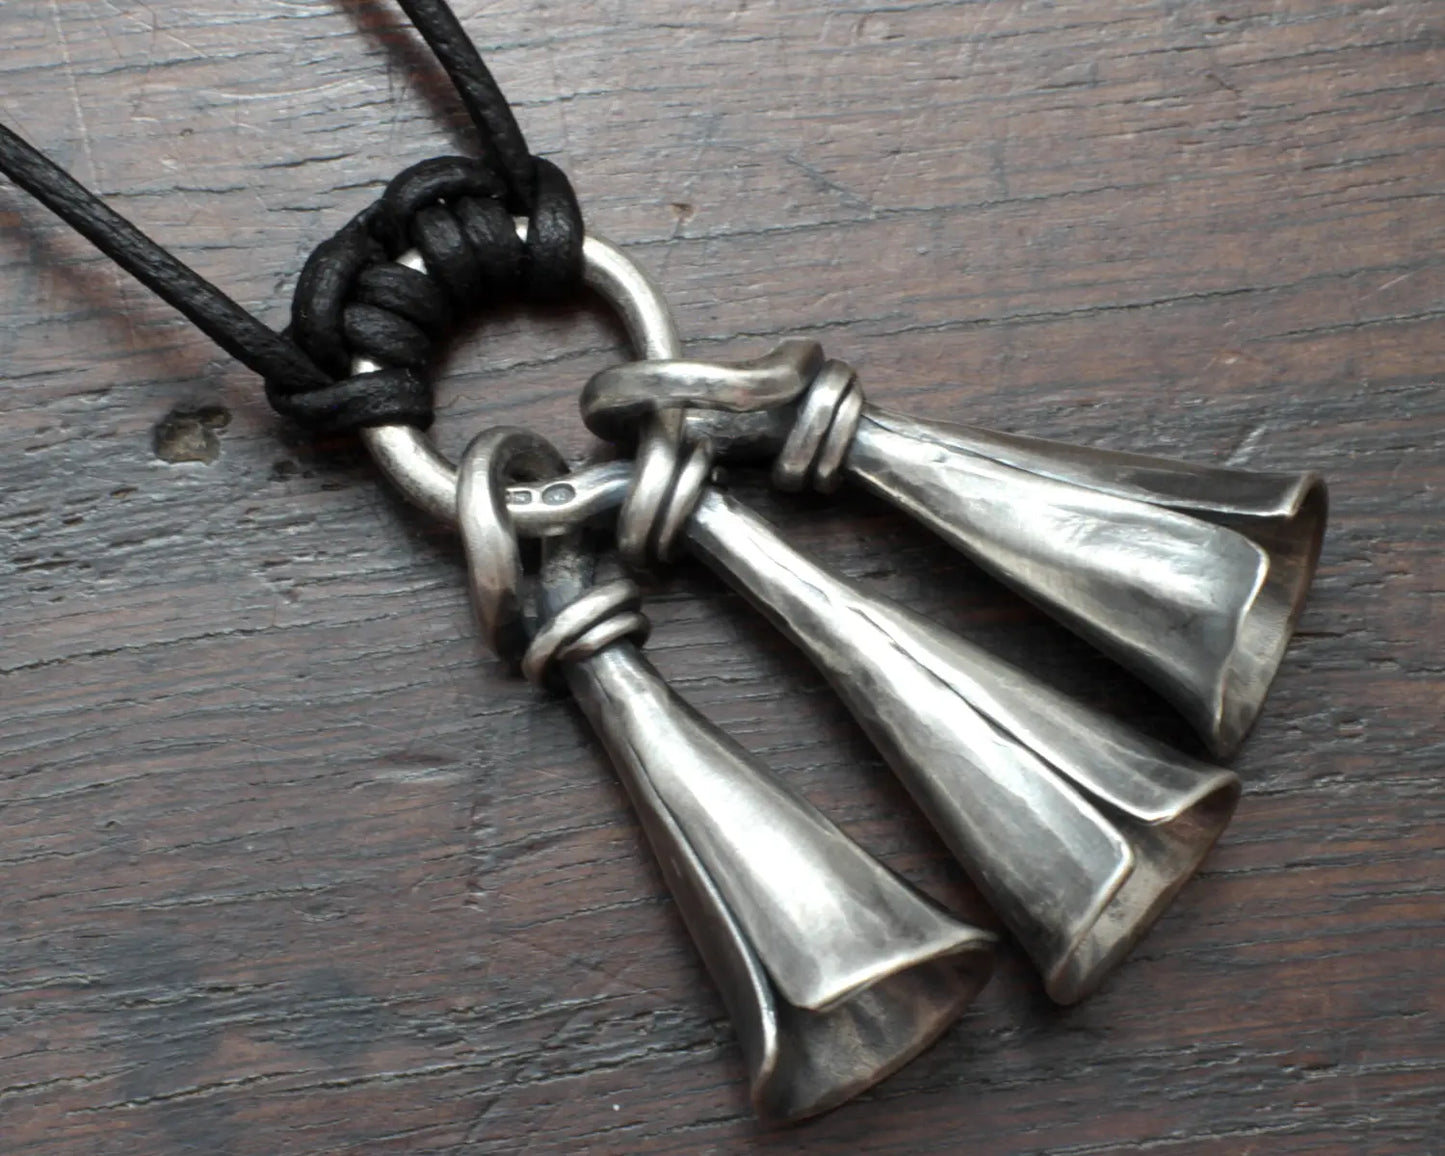 Hot Forged Sterling silver bell necklace by artist blacksmith Marleena Barran from Taitaya Forge